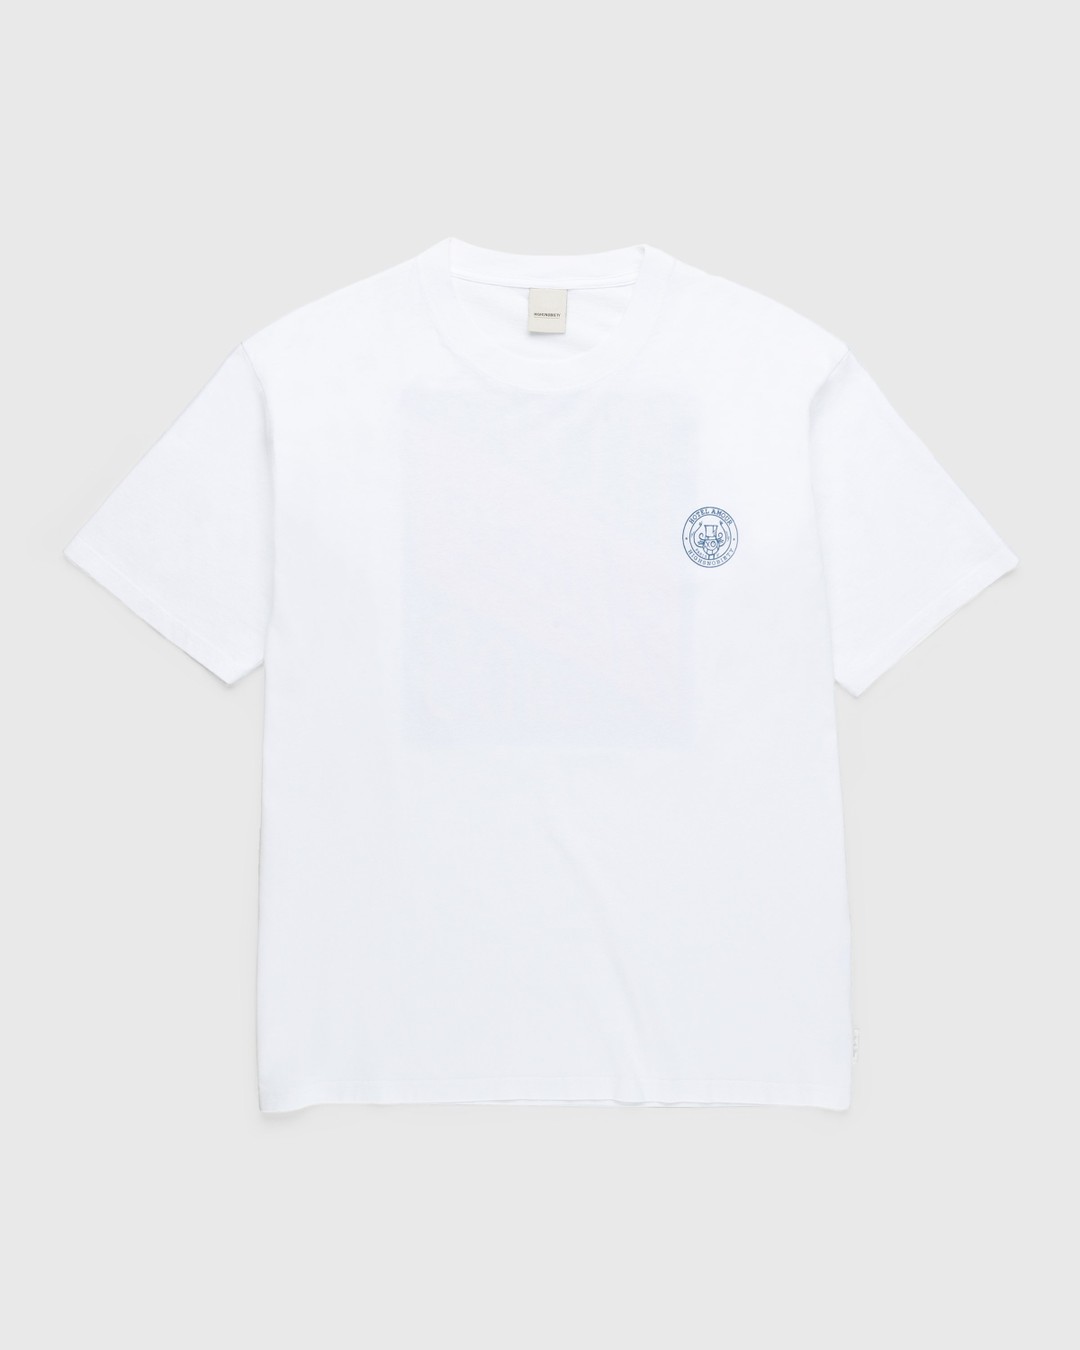 Hotel Amour x Highsnobiety – Not In Paris 4 T-Shirt White - T-shirts - White - Image 2